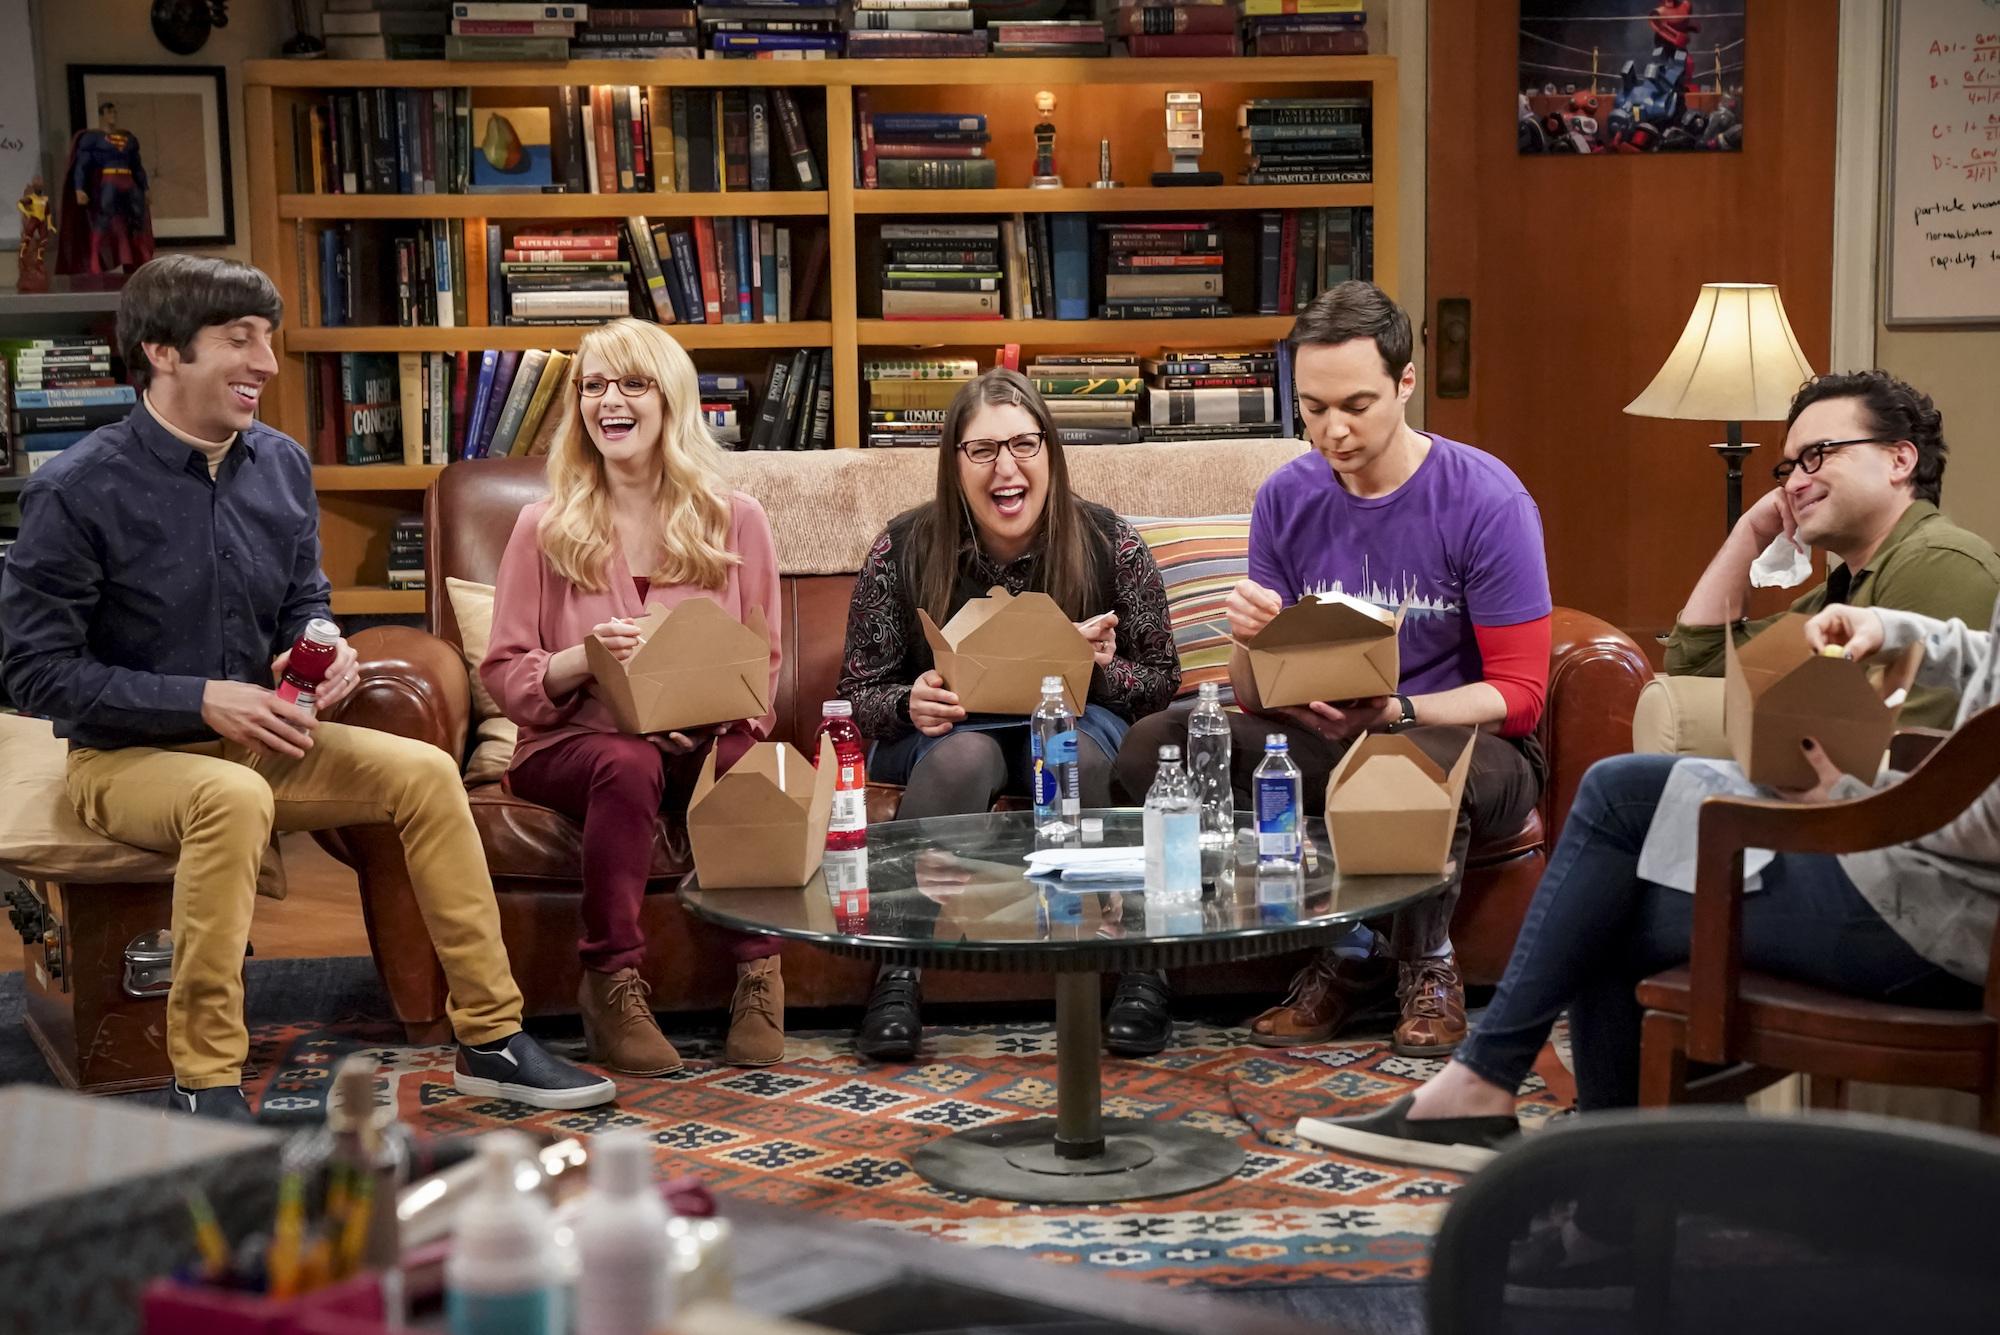 The Big Bang Theory cast eats takeout on the sofa